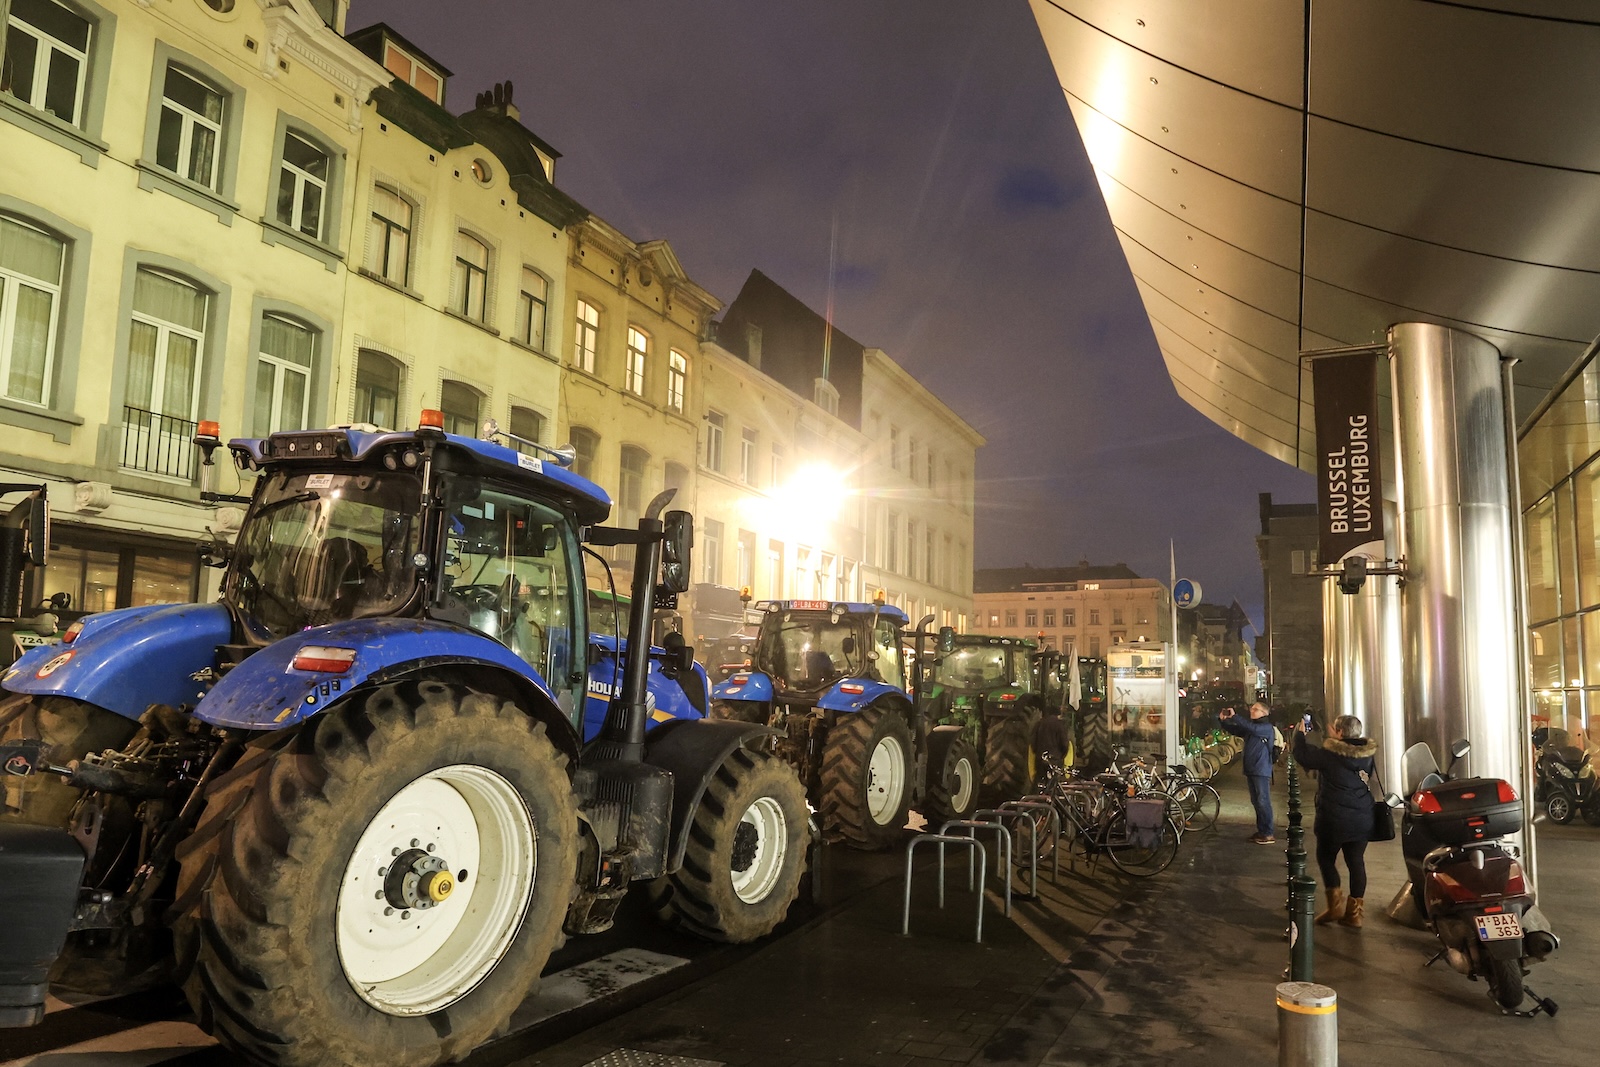 epa11117271 Farmers' tractors converge in front of the European Parliament during a protest on the sidelines of a EU summit in Brussels, Belgium, 01 February 2024. Several hundred tractors are expected to converge on Brussels on the sidelines of a European leaders' summit on 01 February, the Walloon Federation of Agriculture (FWA) announced. Farmers are protesting to highlight their declining incomes, overly complex legislation and administrative overload. The discontent among farmers, initially sparked in France, has spilled over into several European countries, including Belgium, particularly in the Walloon region.  EPA/OLIVIER HOSLET